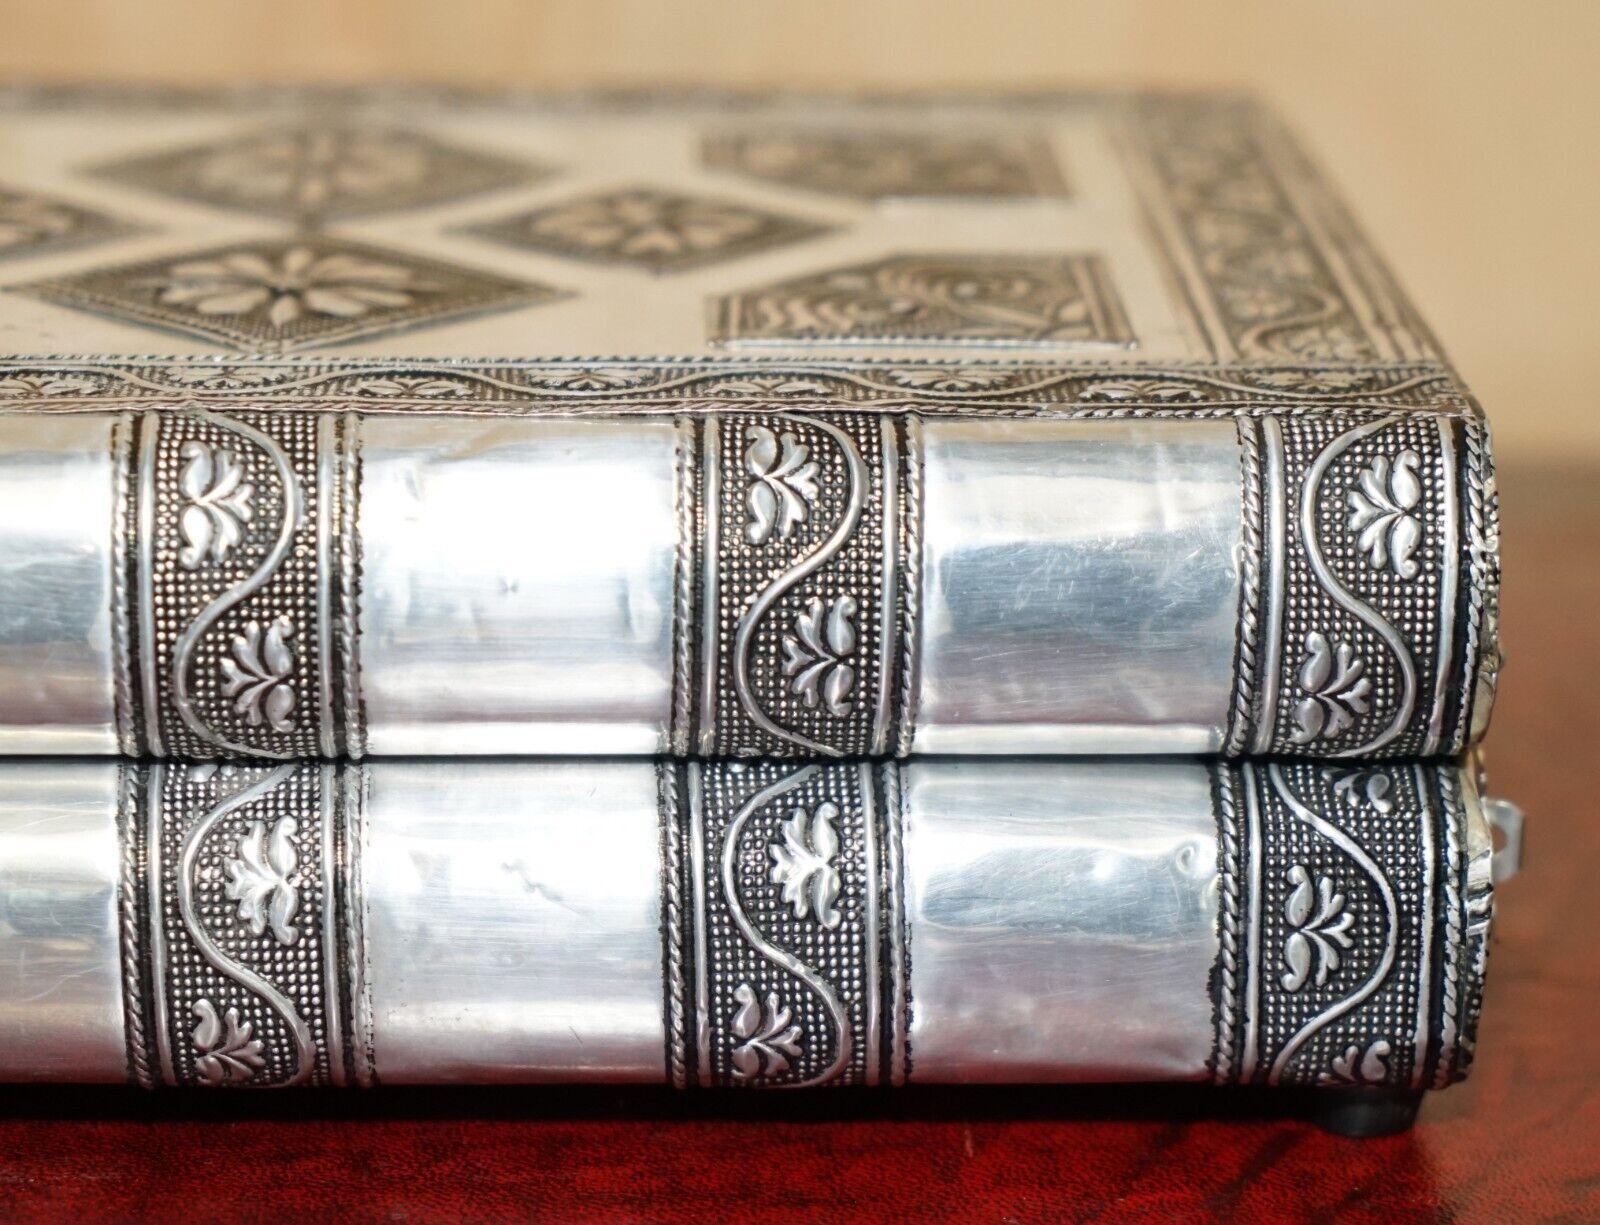 Art Deco REPOUSSE INDiAN SILVER STACK OF BOOKS HIDDEN JEWELLERY BOX STORAGE LOVELY FIND